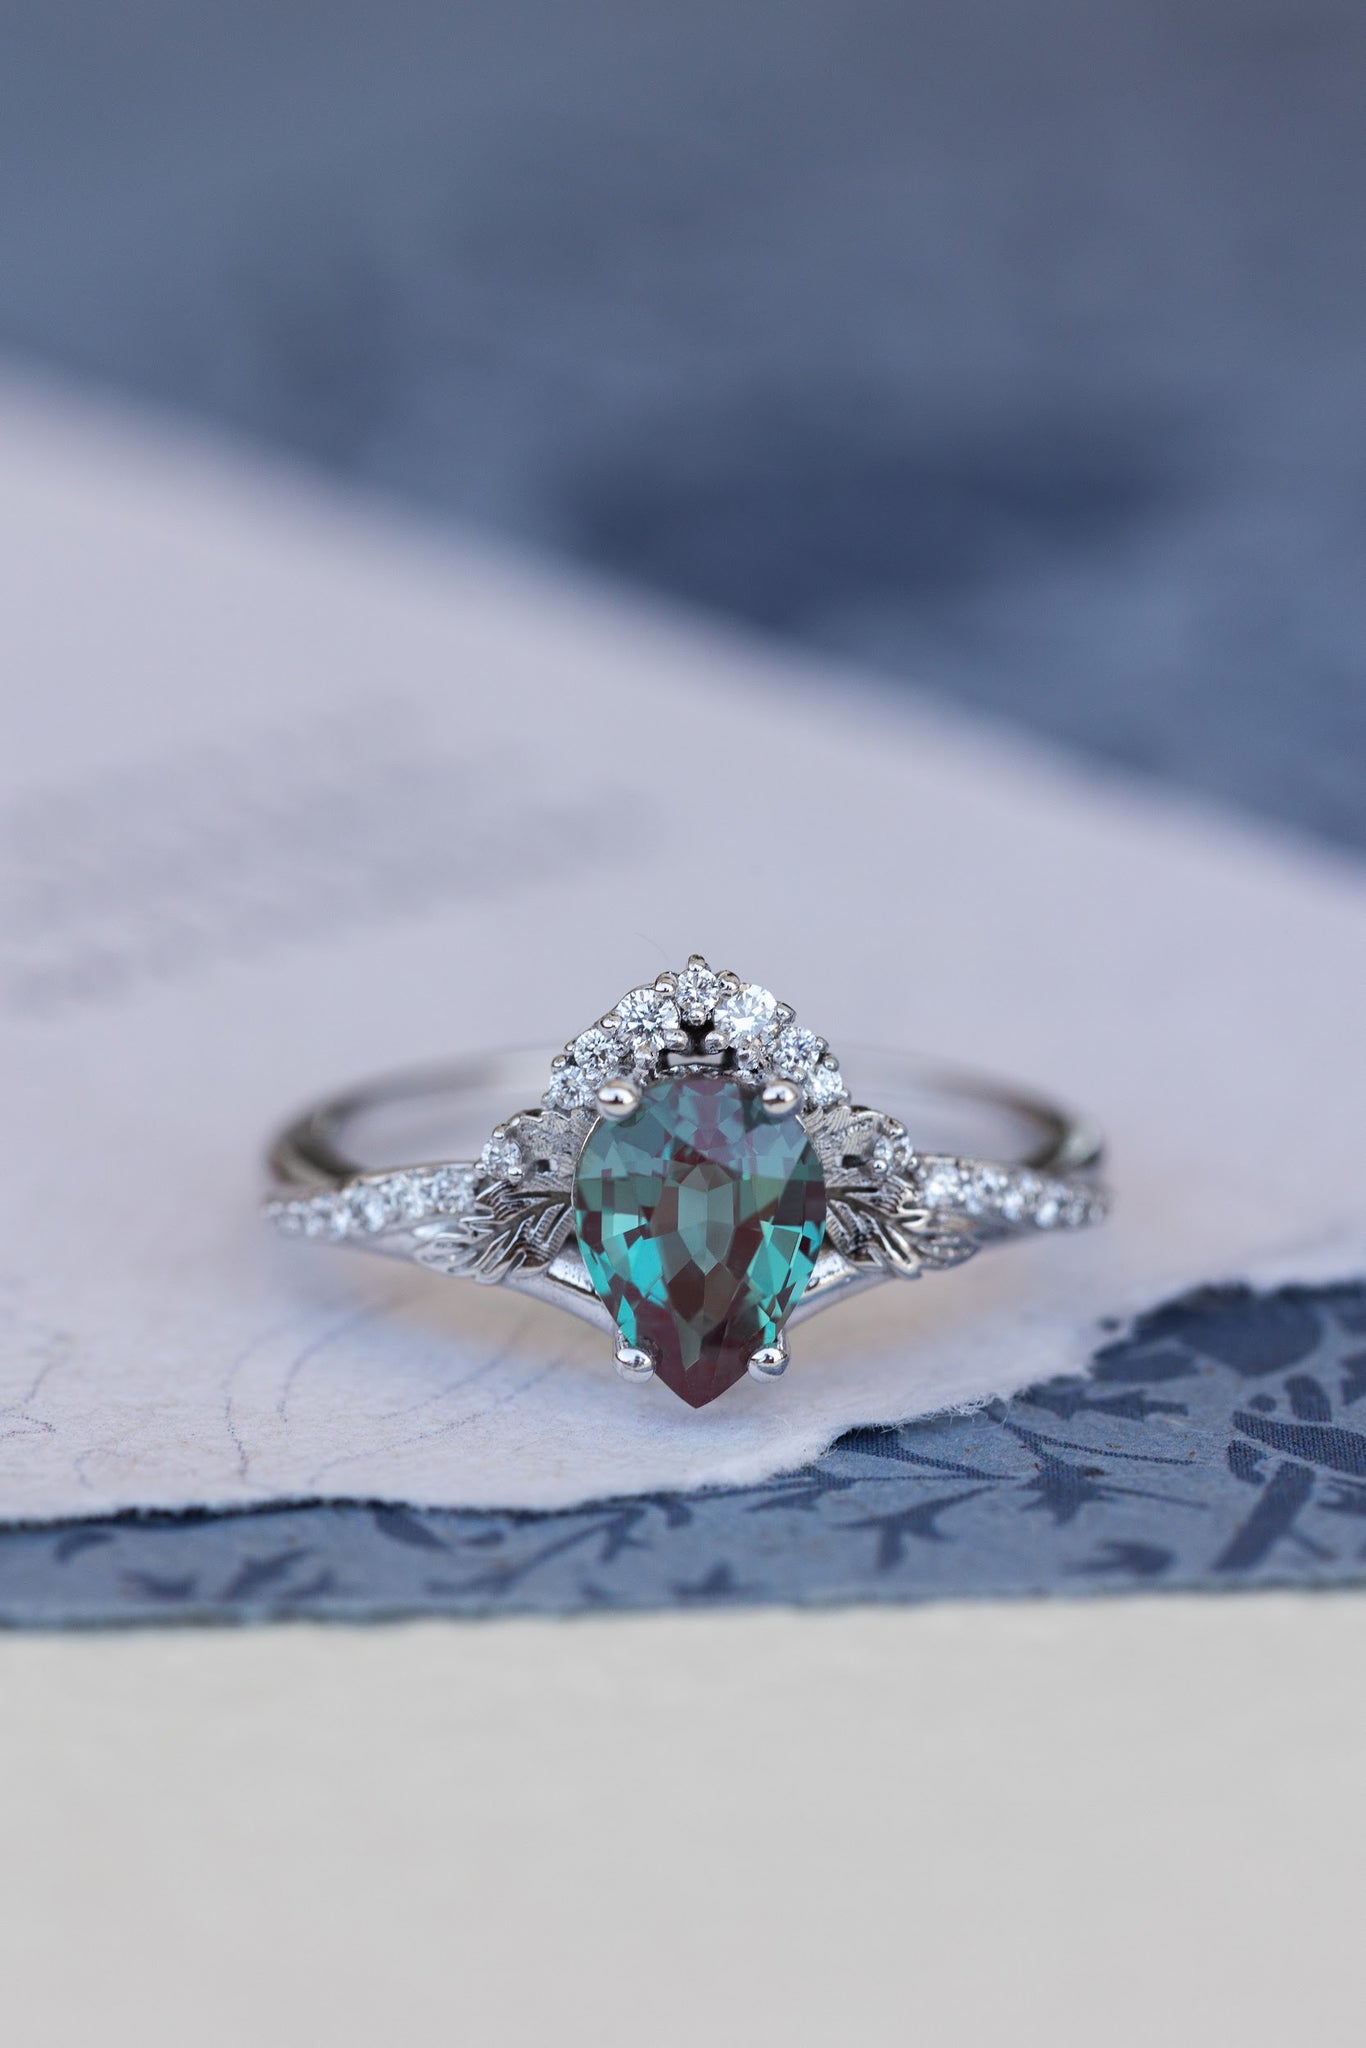 Pear lab alexandrite engagement ring, nature inspired proposal ring with accent diamonds / Amelia - Eden Garden Jewelry™